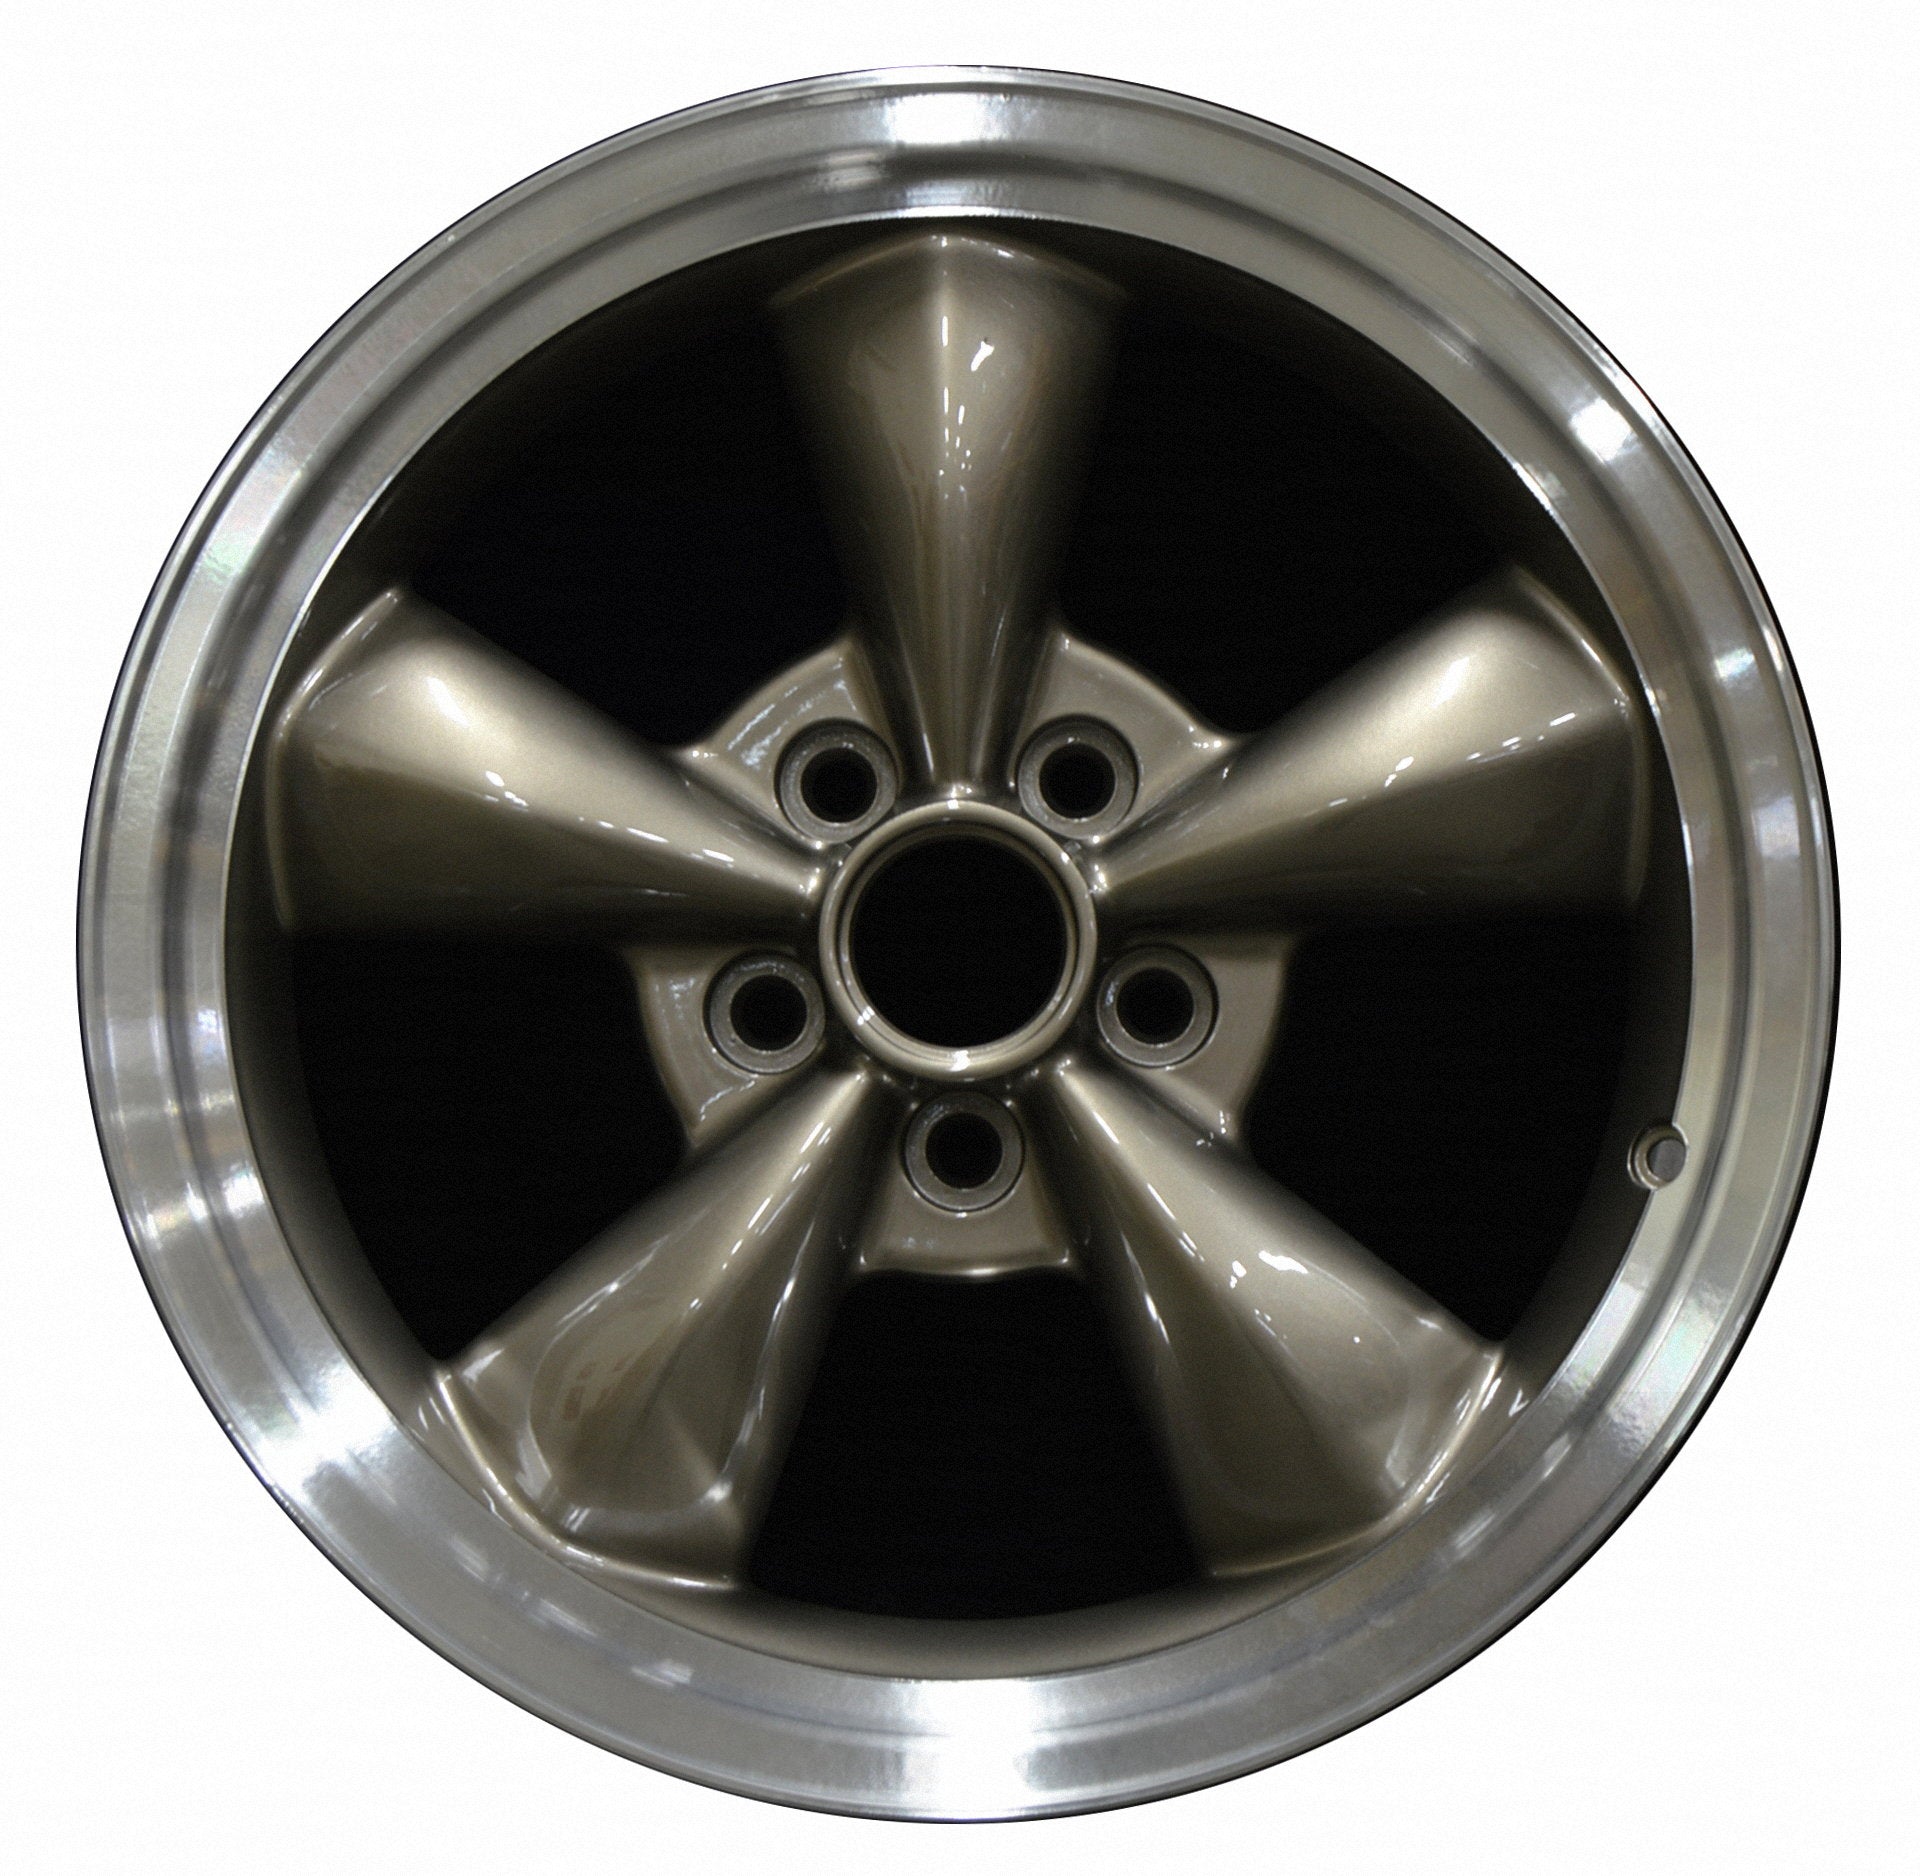 Ford Mustang  1994, 1995, 1996, 1997, 1998, 1999, 2000, 2001, 2002, 2003, 2004 Factory OEM Car Wheel Size 17x8 Alloy WAO.3448.LT01.FC